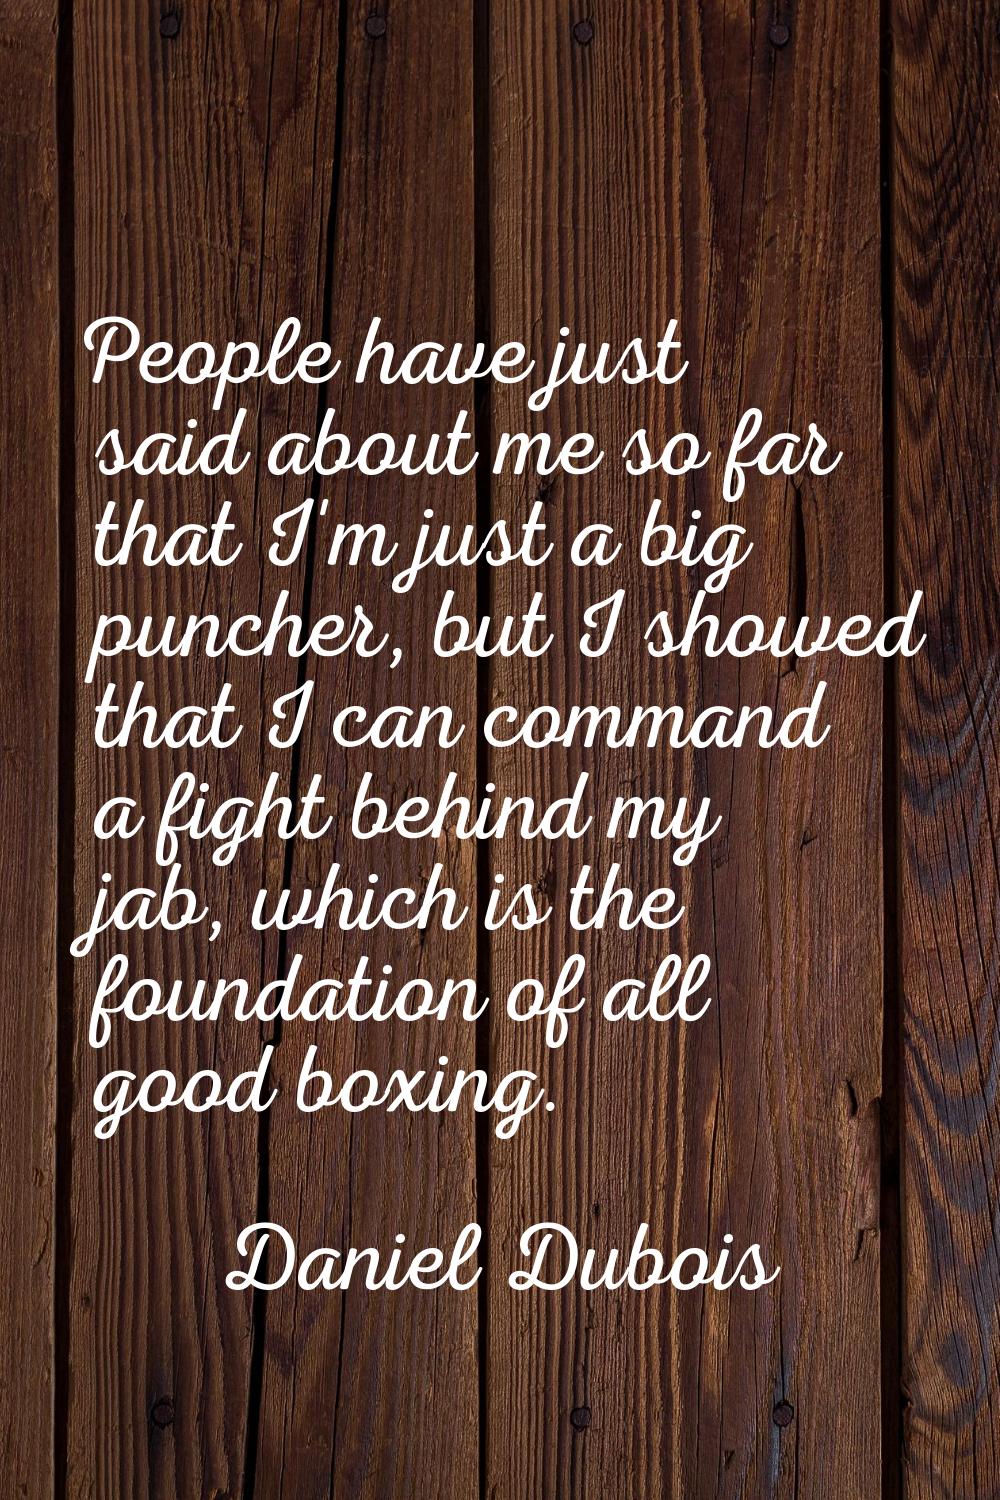 People have just said about me so far that I'm just a big puncher, but I showed that I can command 